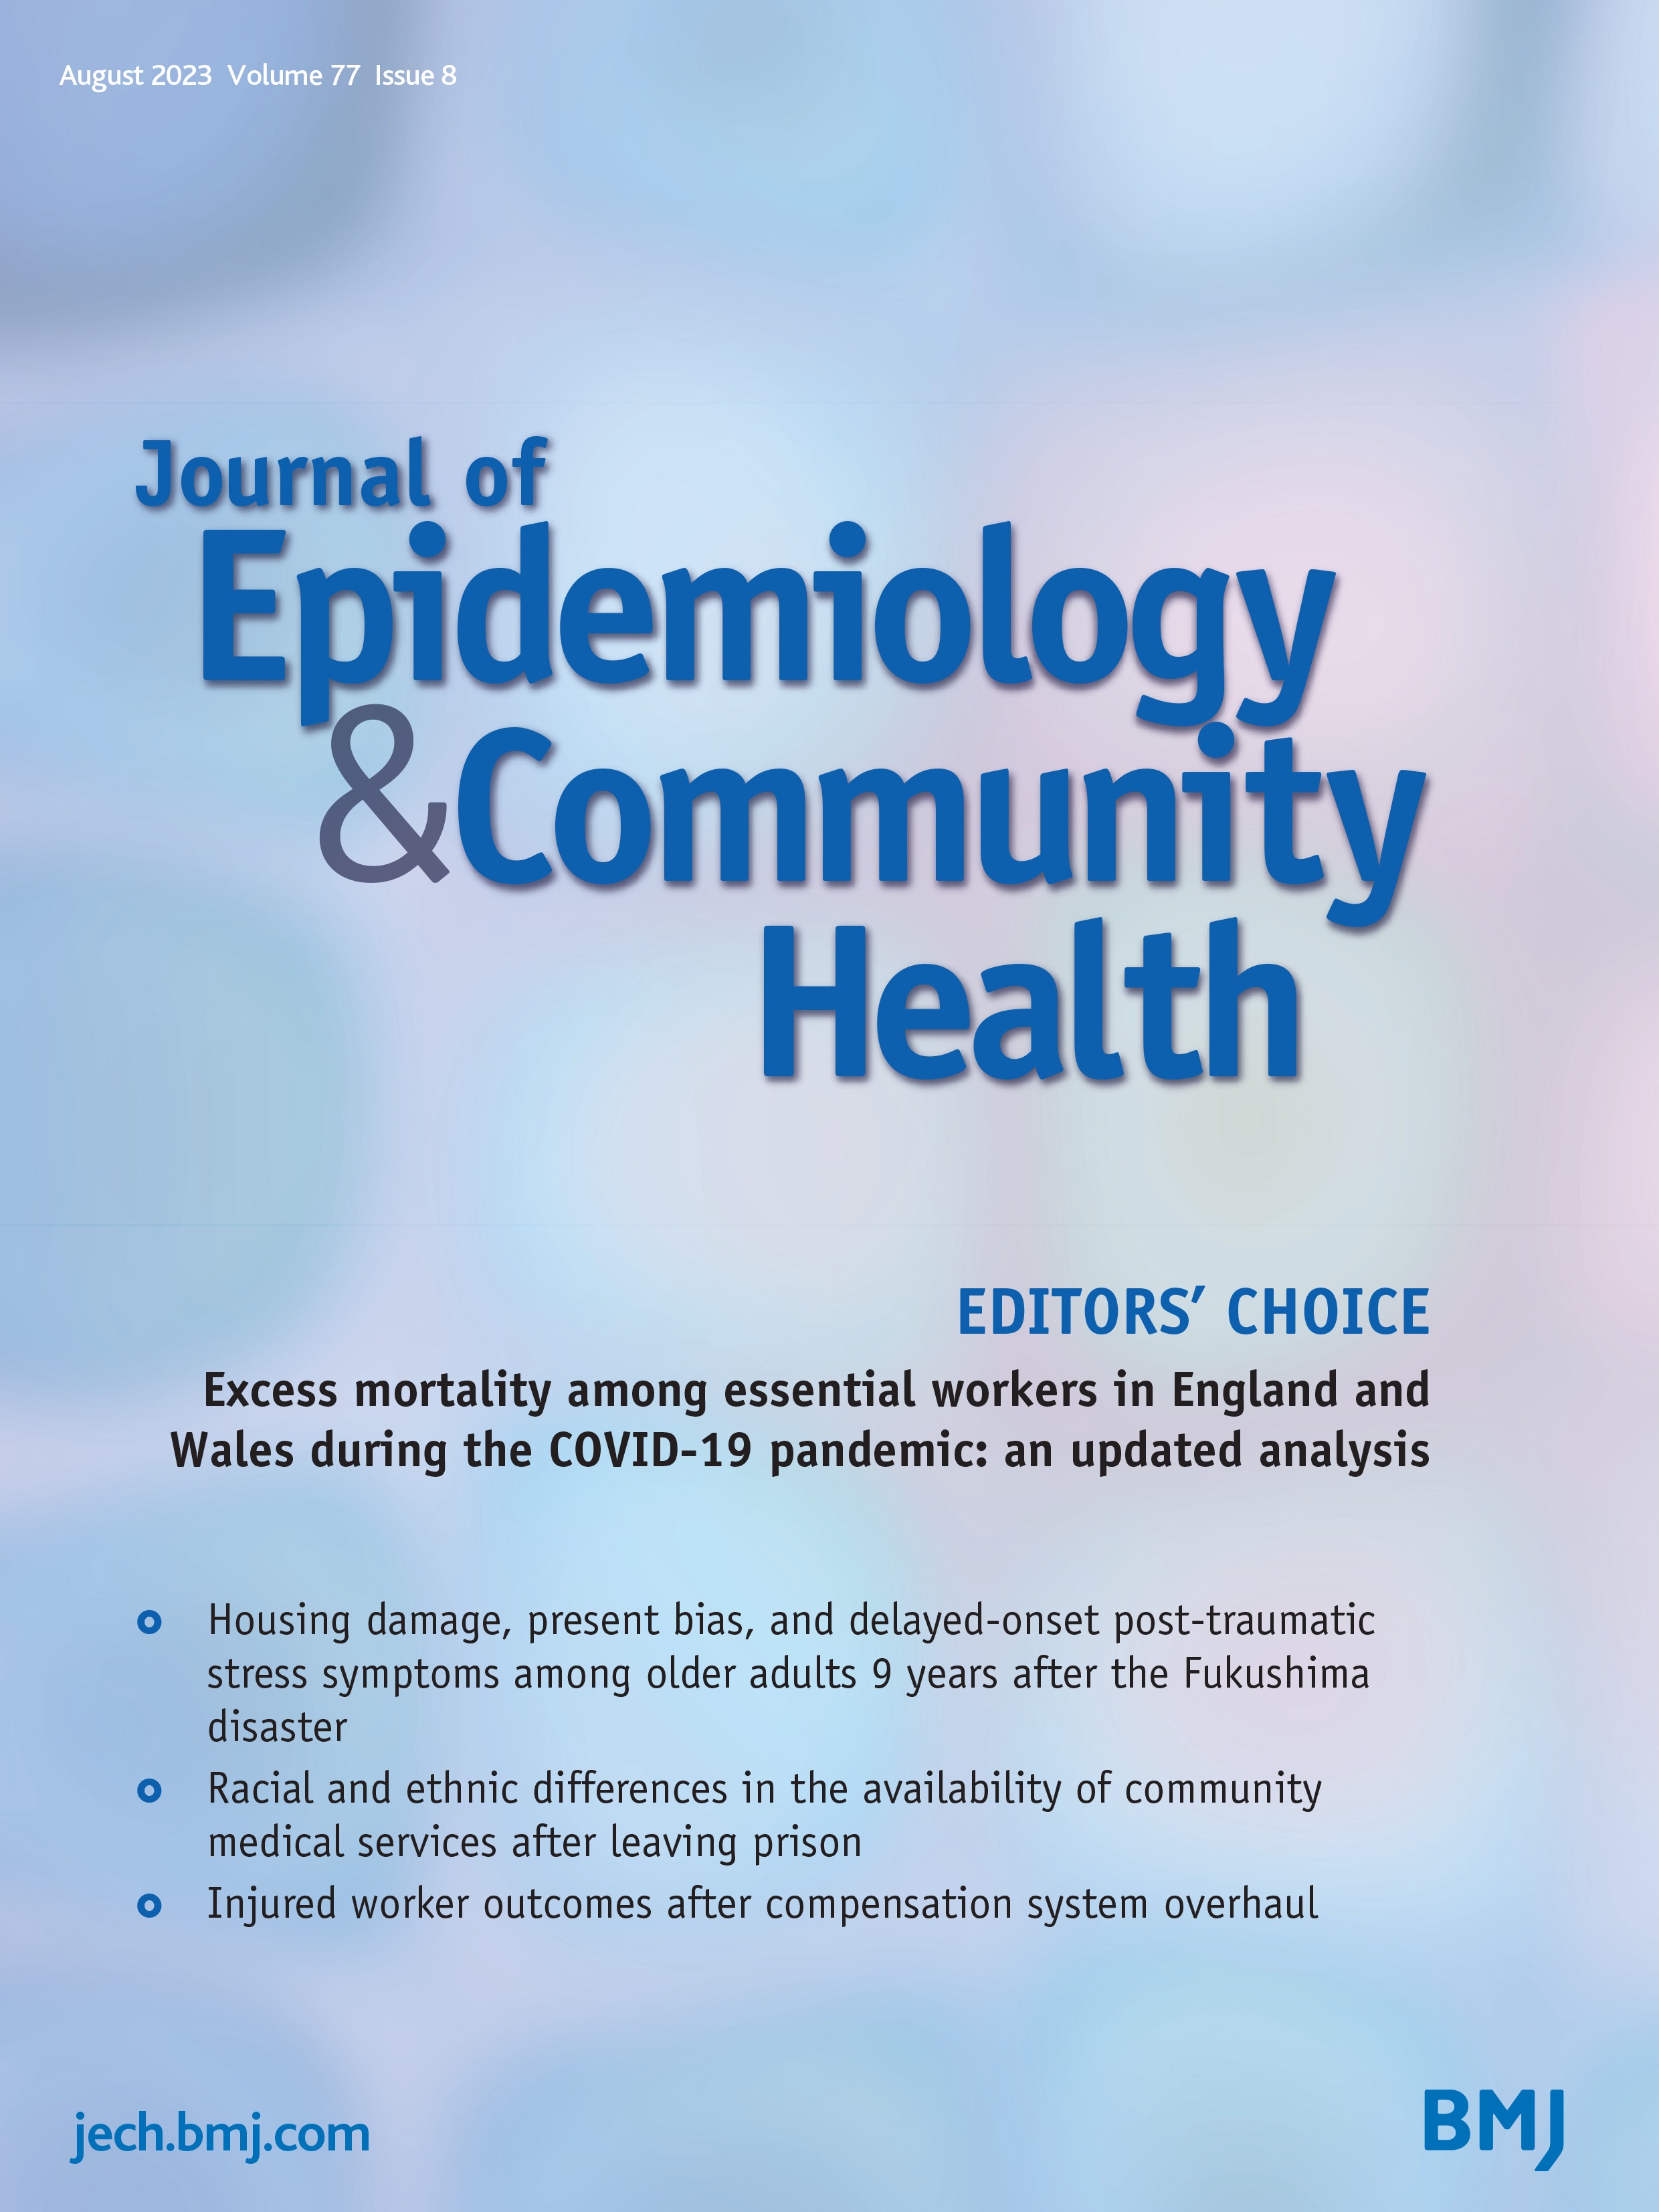 Excess mortality among essential workers in England and Wales during the COVID-19 pandemic: an updated analysis